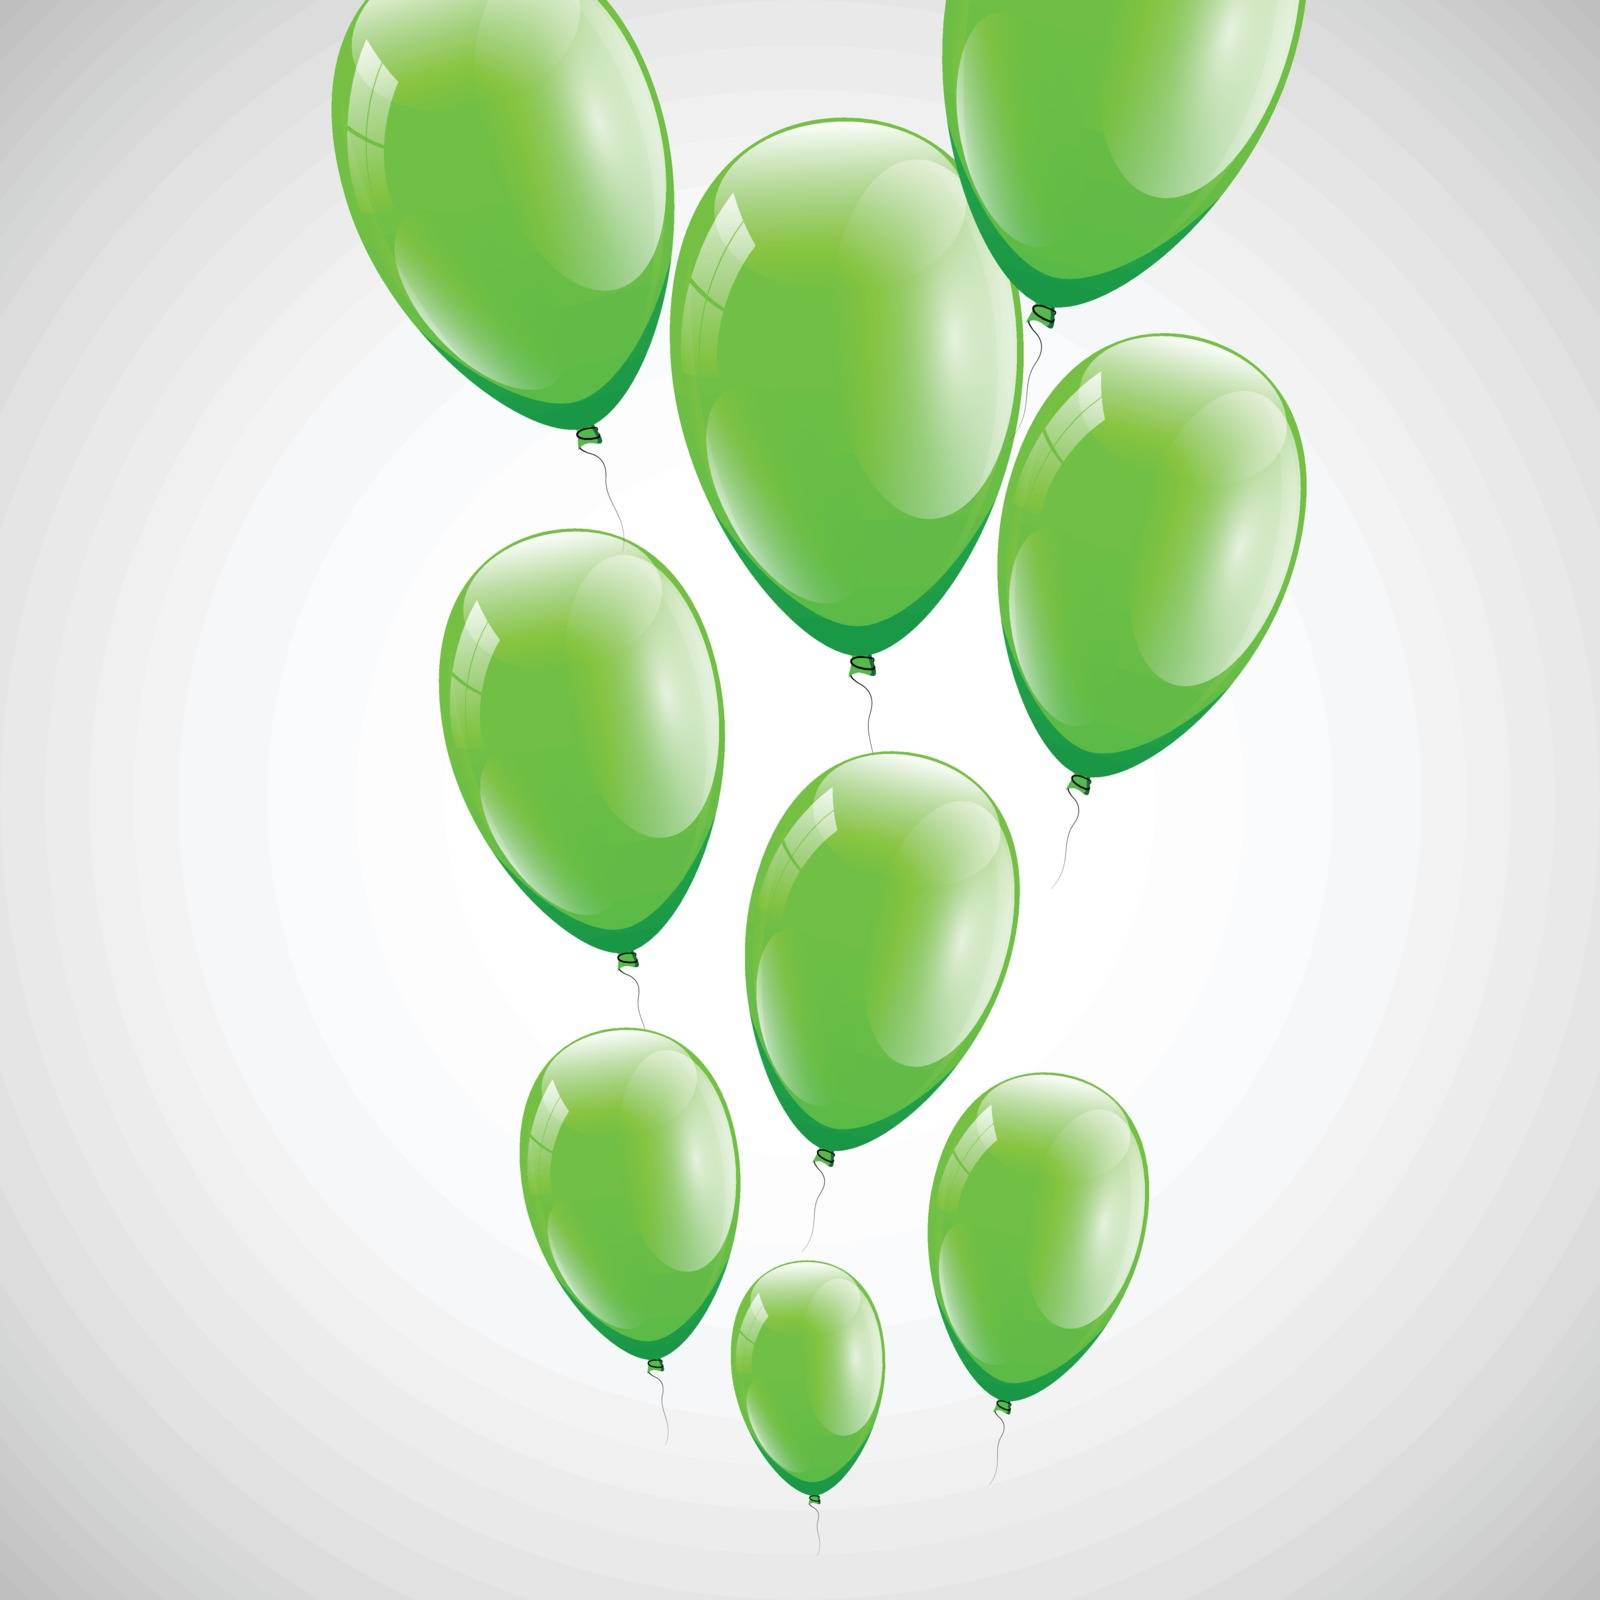 Green balloons with white background by punsayaporn